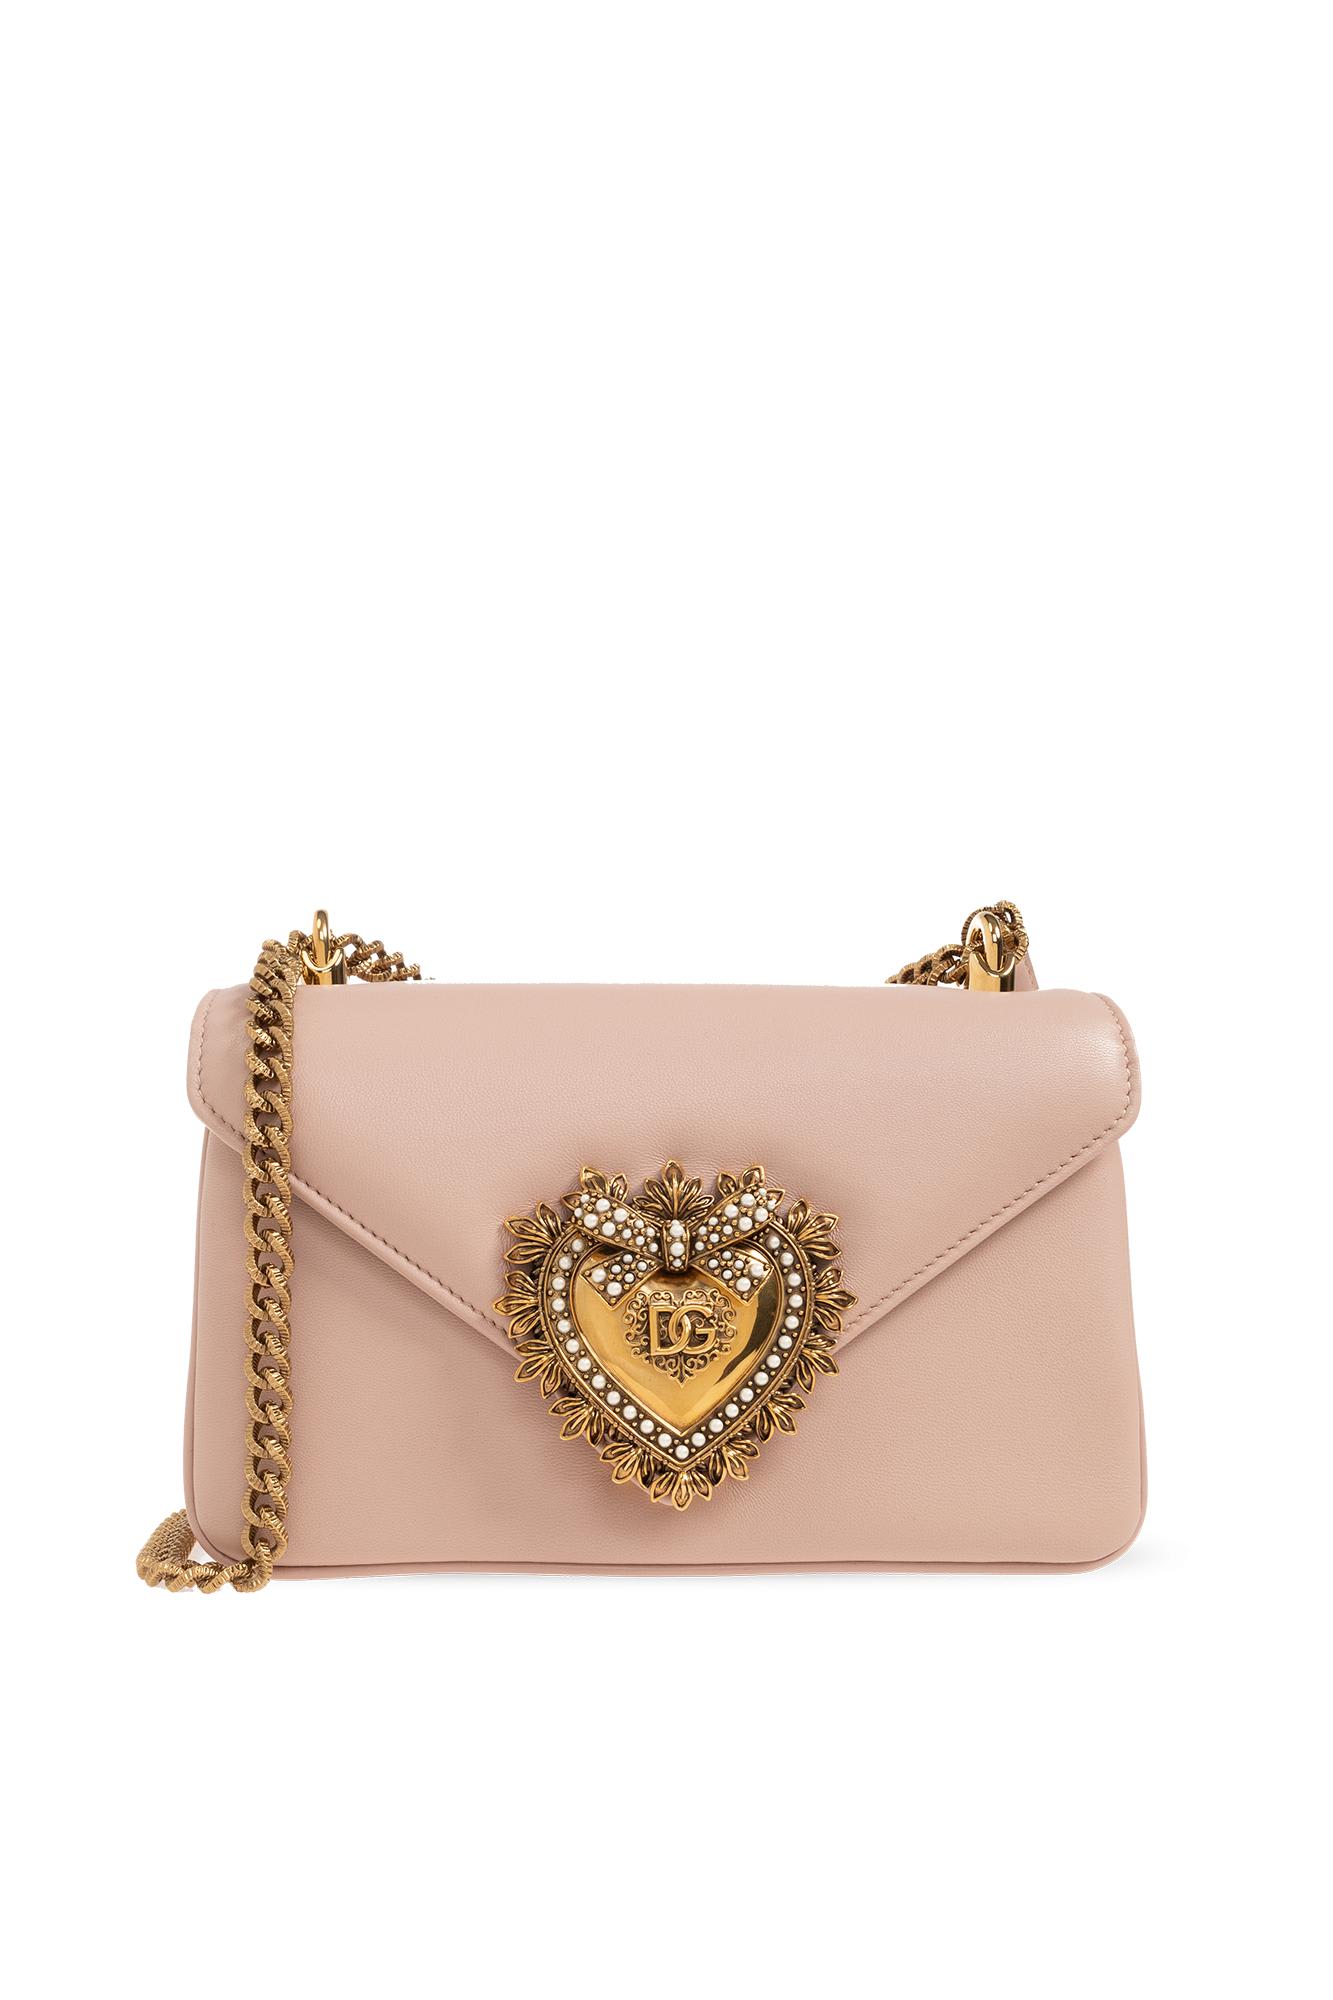 Dolce & Gabbana Devotion Embellished Small Tote Bag in Pink